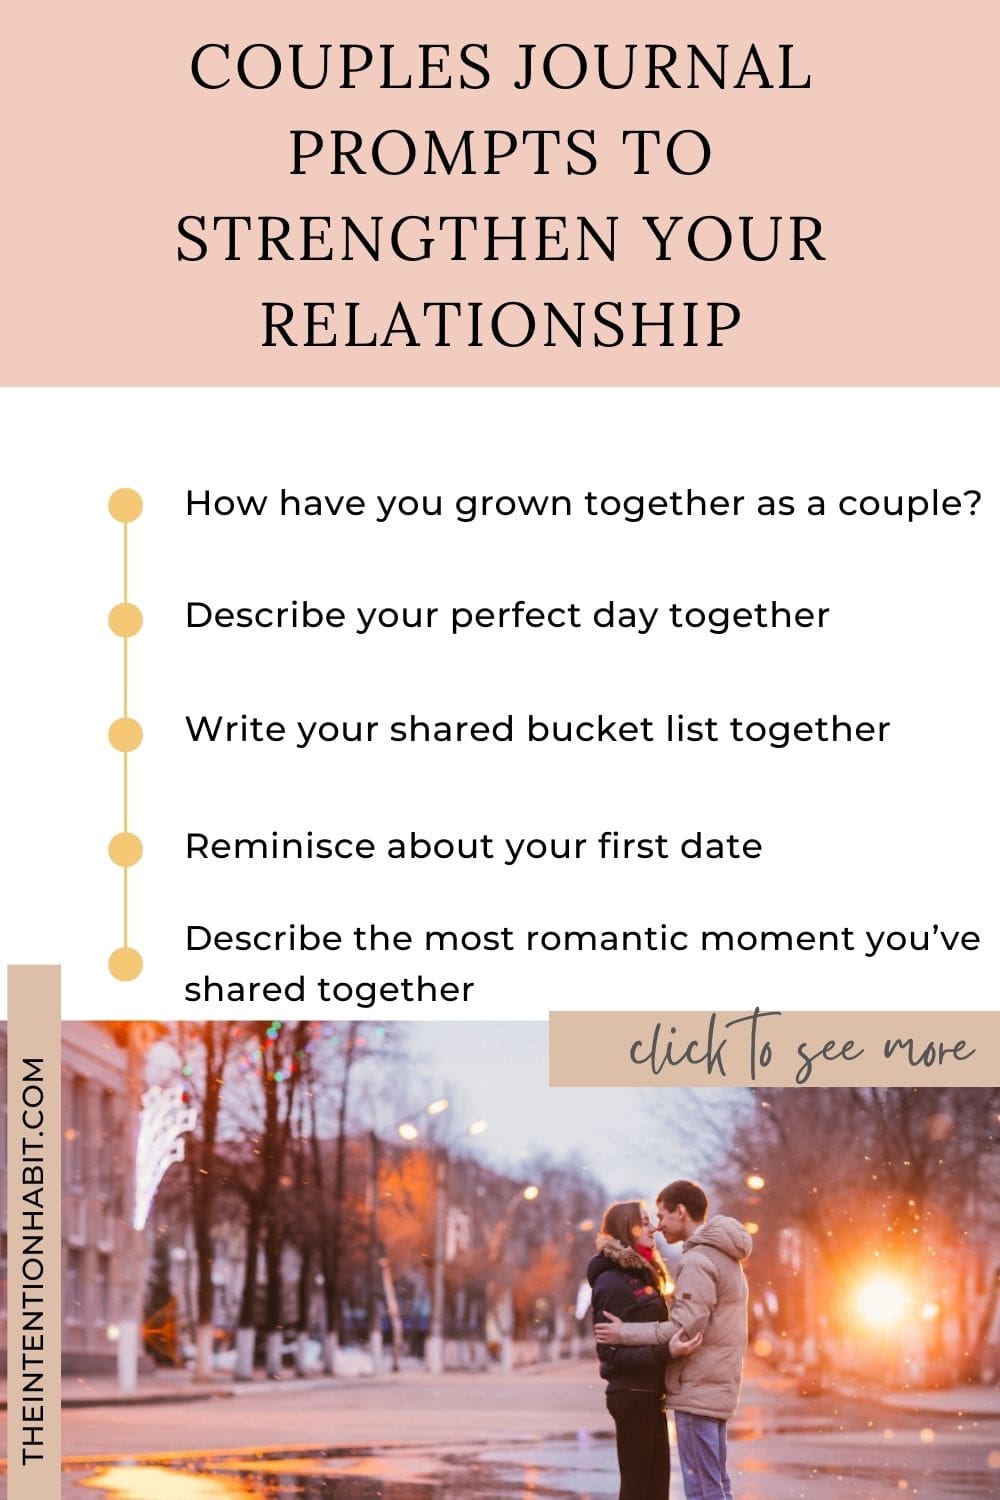 31 Fun + Practical Shared Journal Ideas for Couples